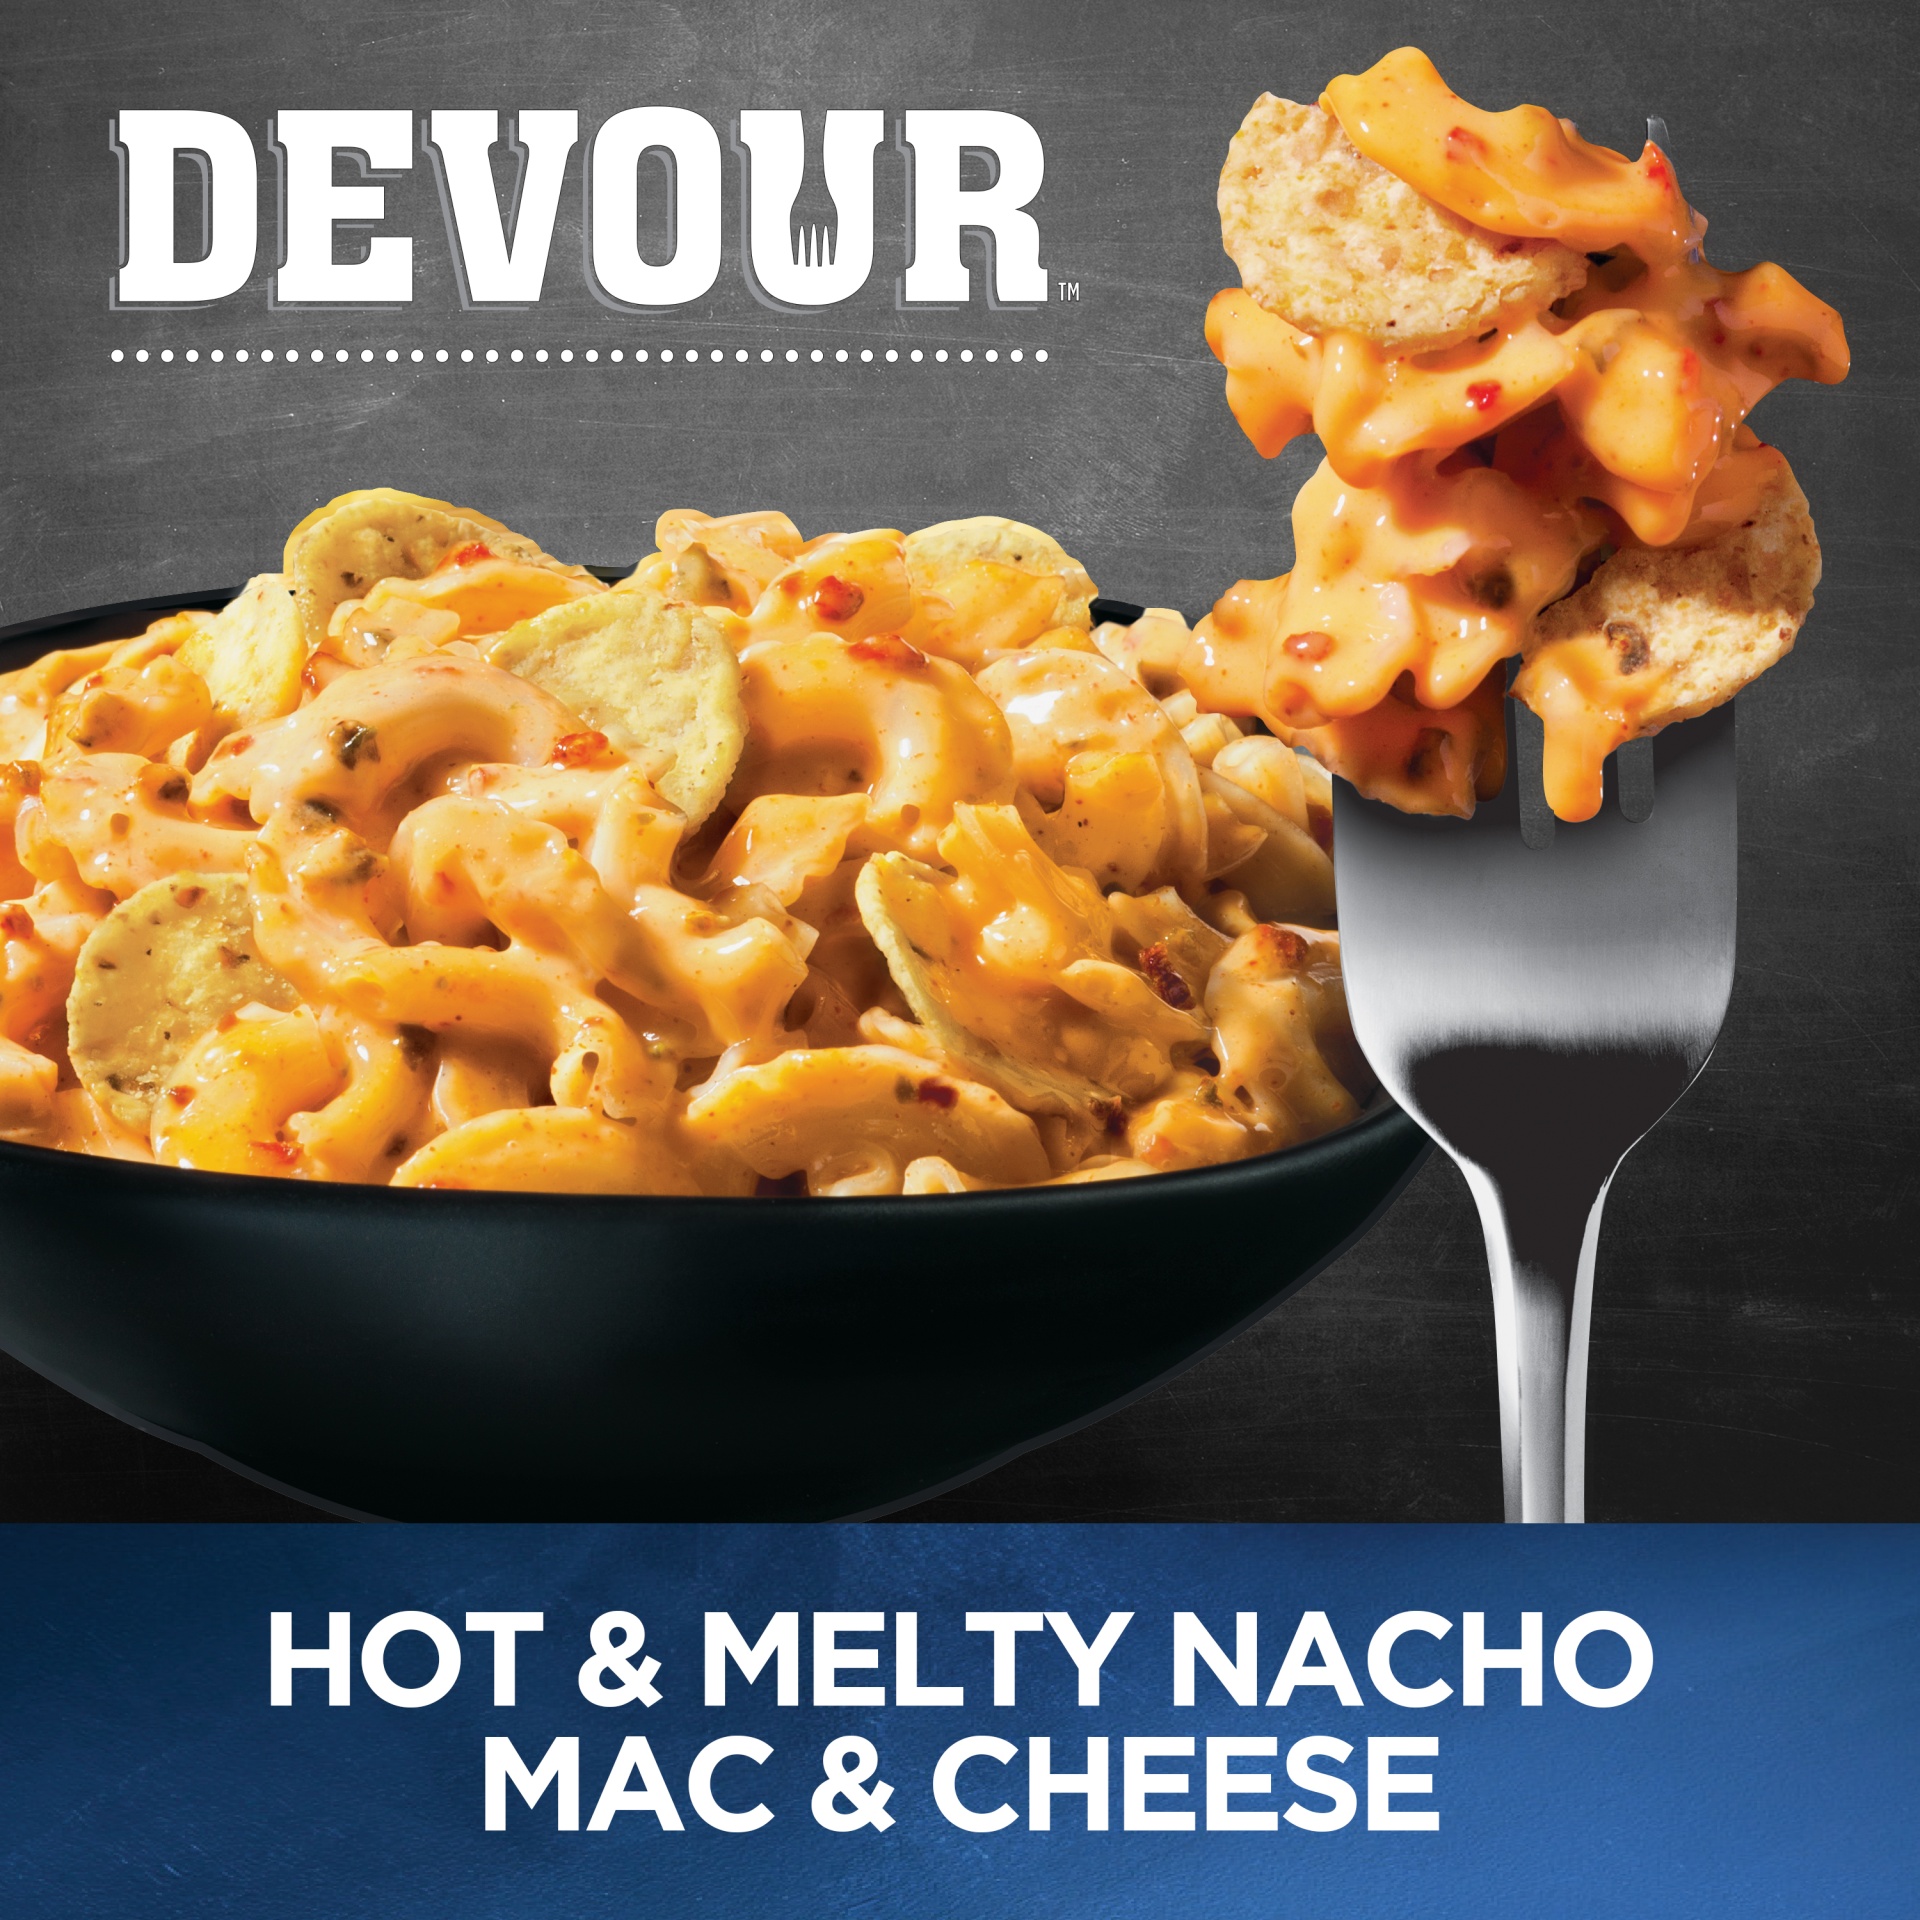 foreign object dound in devour mac and cheese